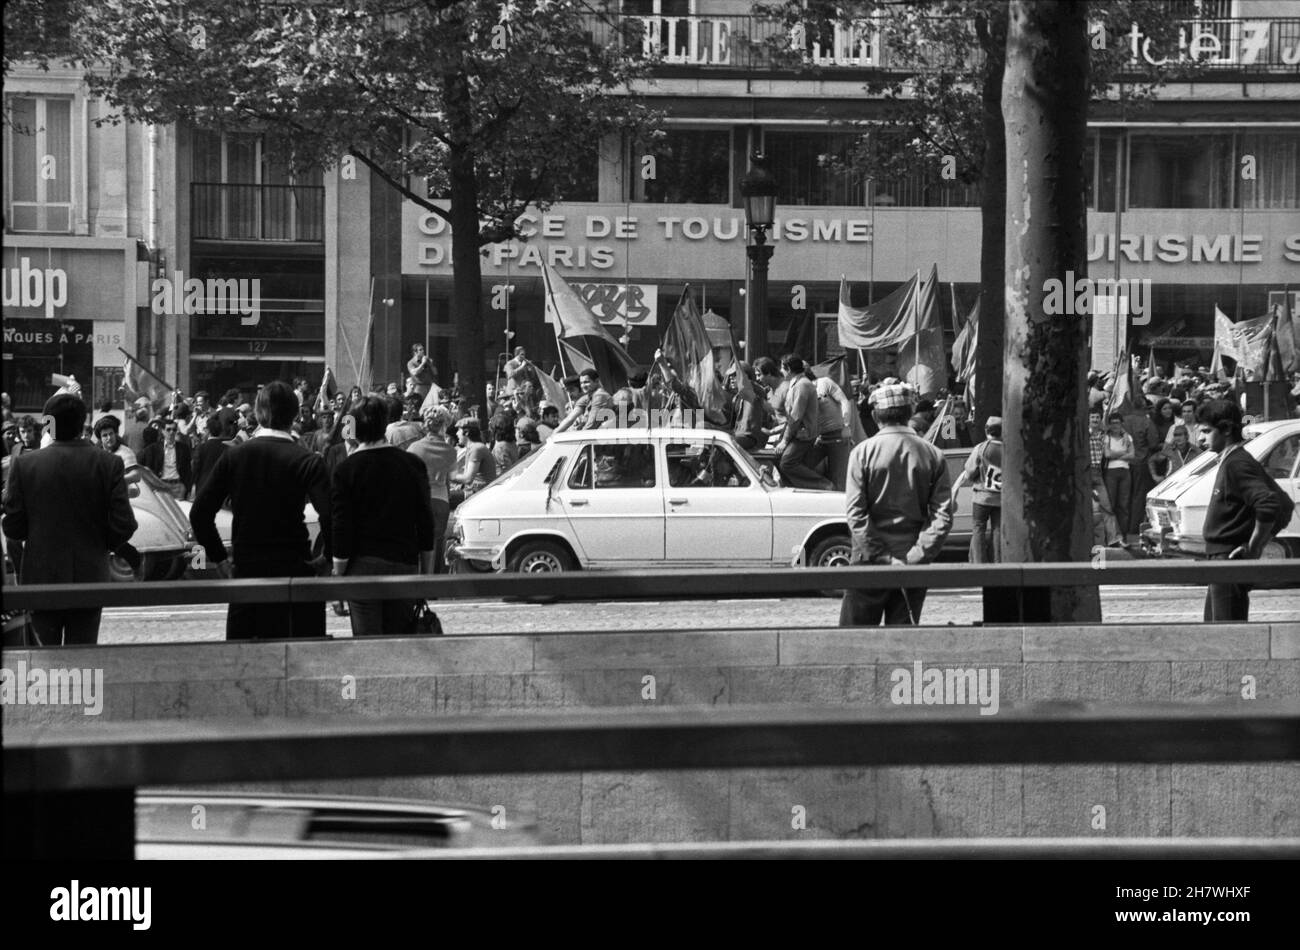 A procession of Beziers fans on the occasion of the victory in the rugby  club championship. In 1978, according to the established tradition, the  team took the second champion title in a